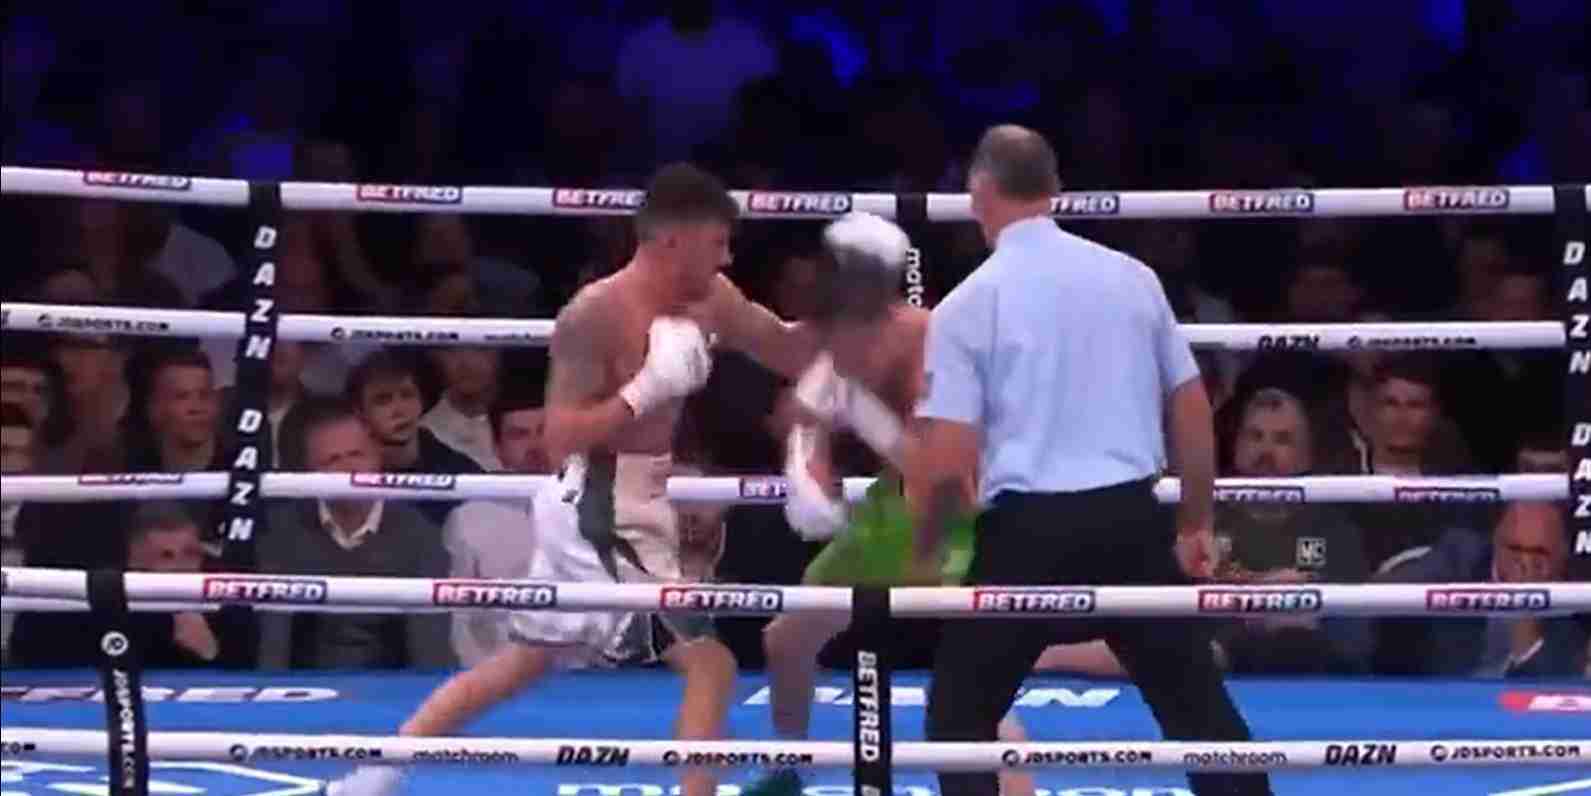 36 Seconds Of Mayhem Shows Why Boxing Is The Best Sport On Earth